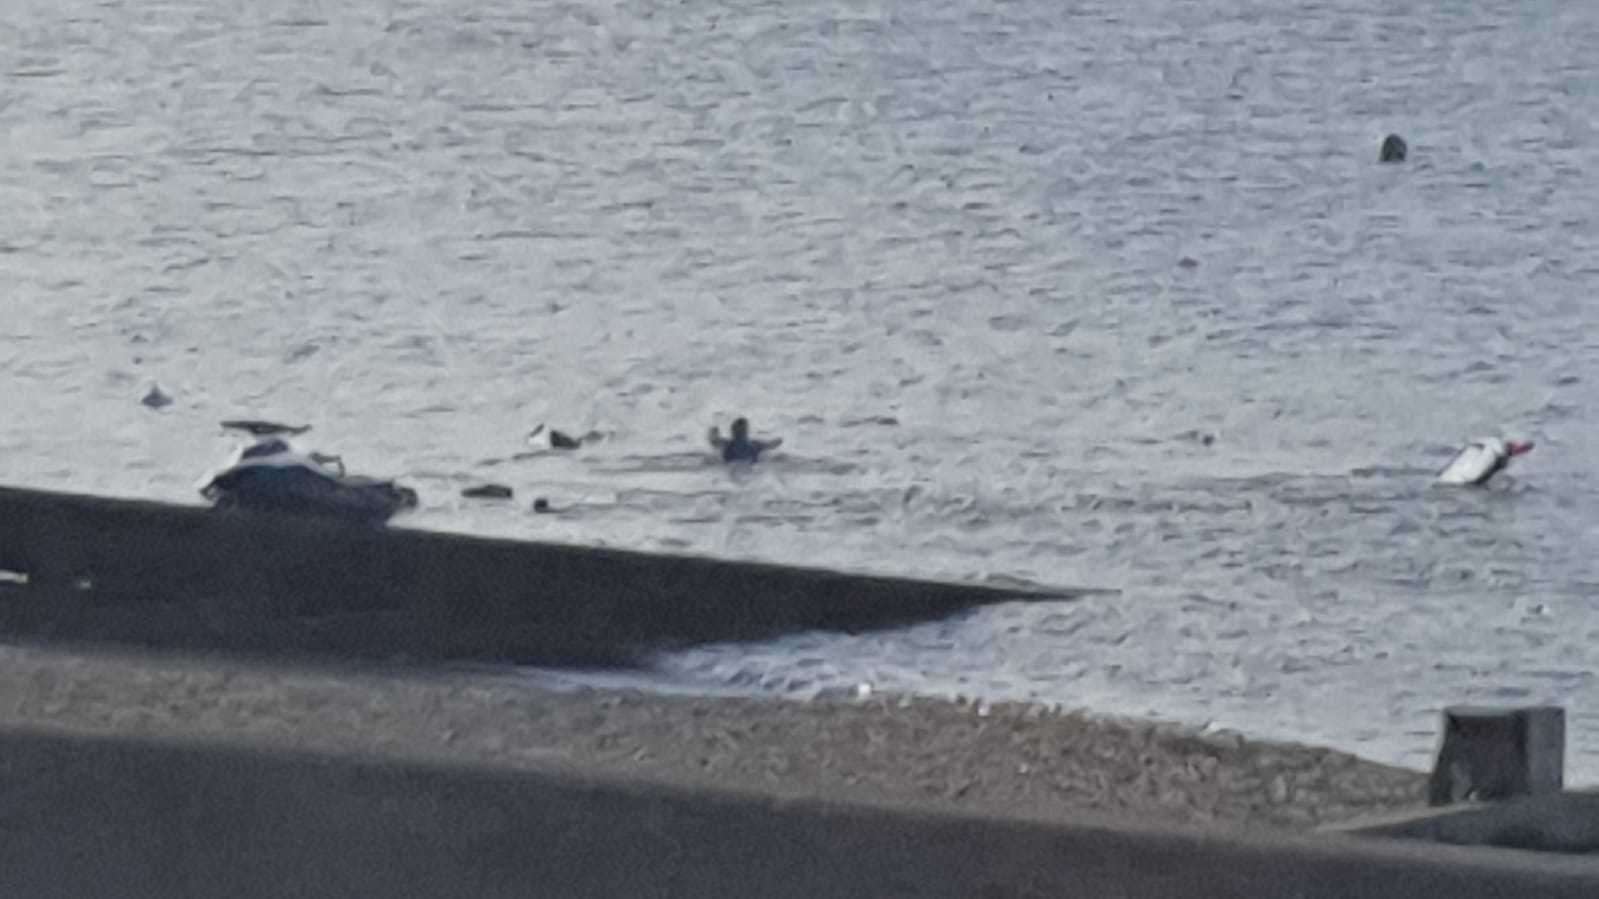 A person swimming out to the car